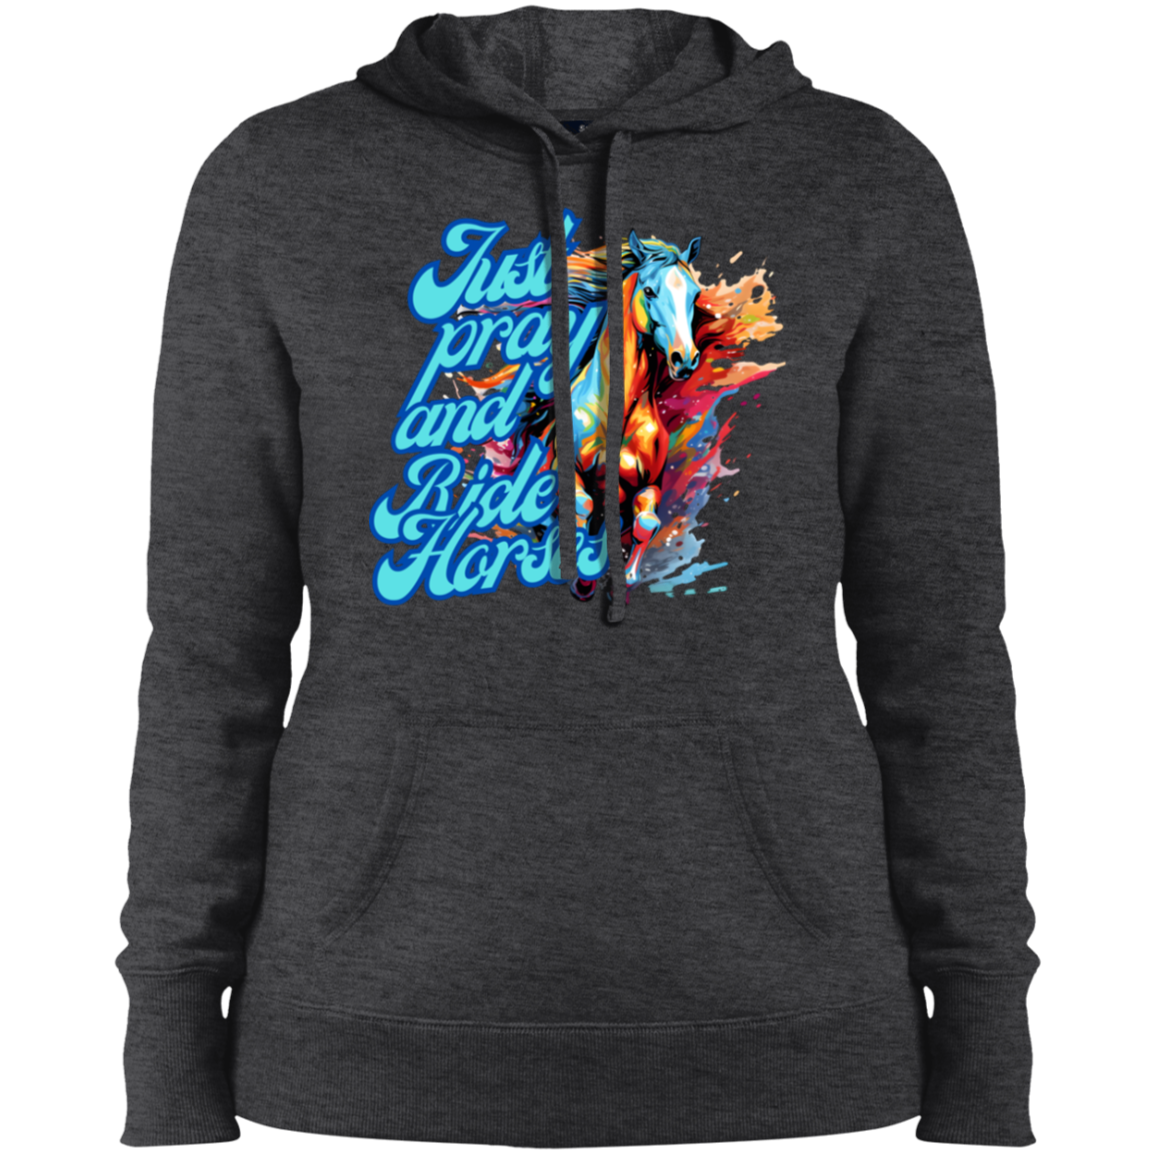 Just Pray and Ride Horses Hoodie For Horse Lovers